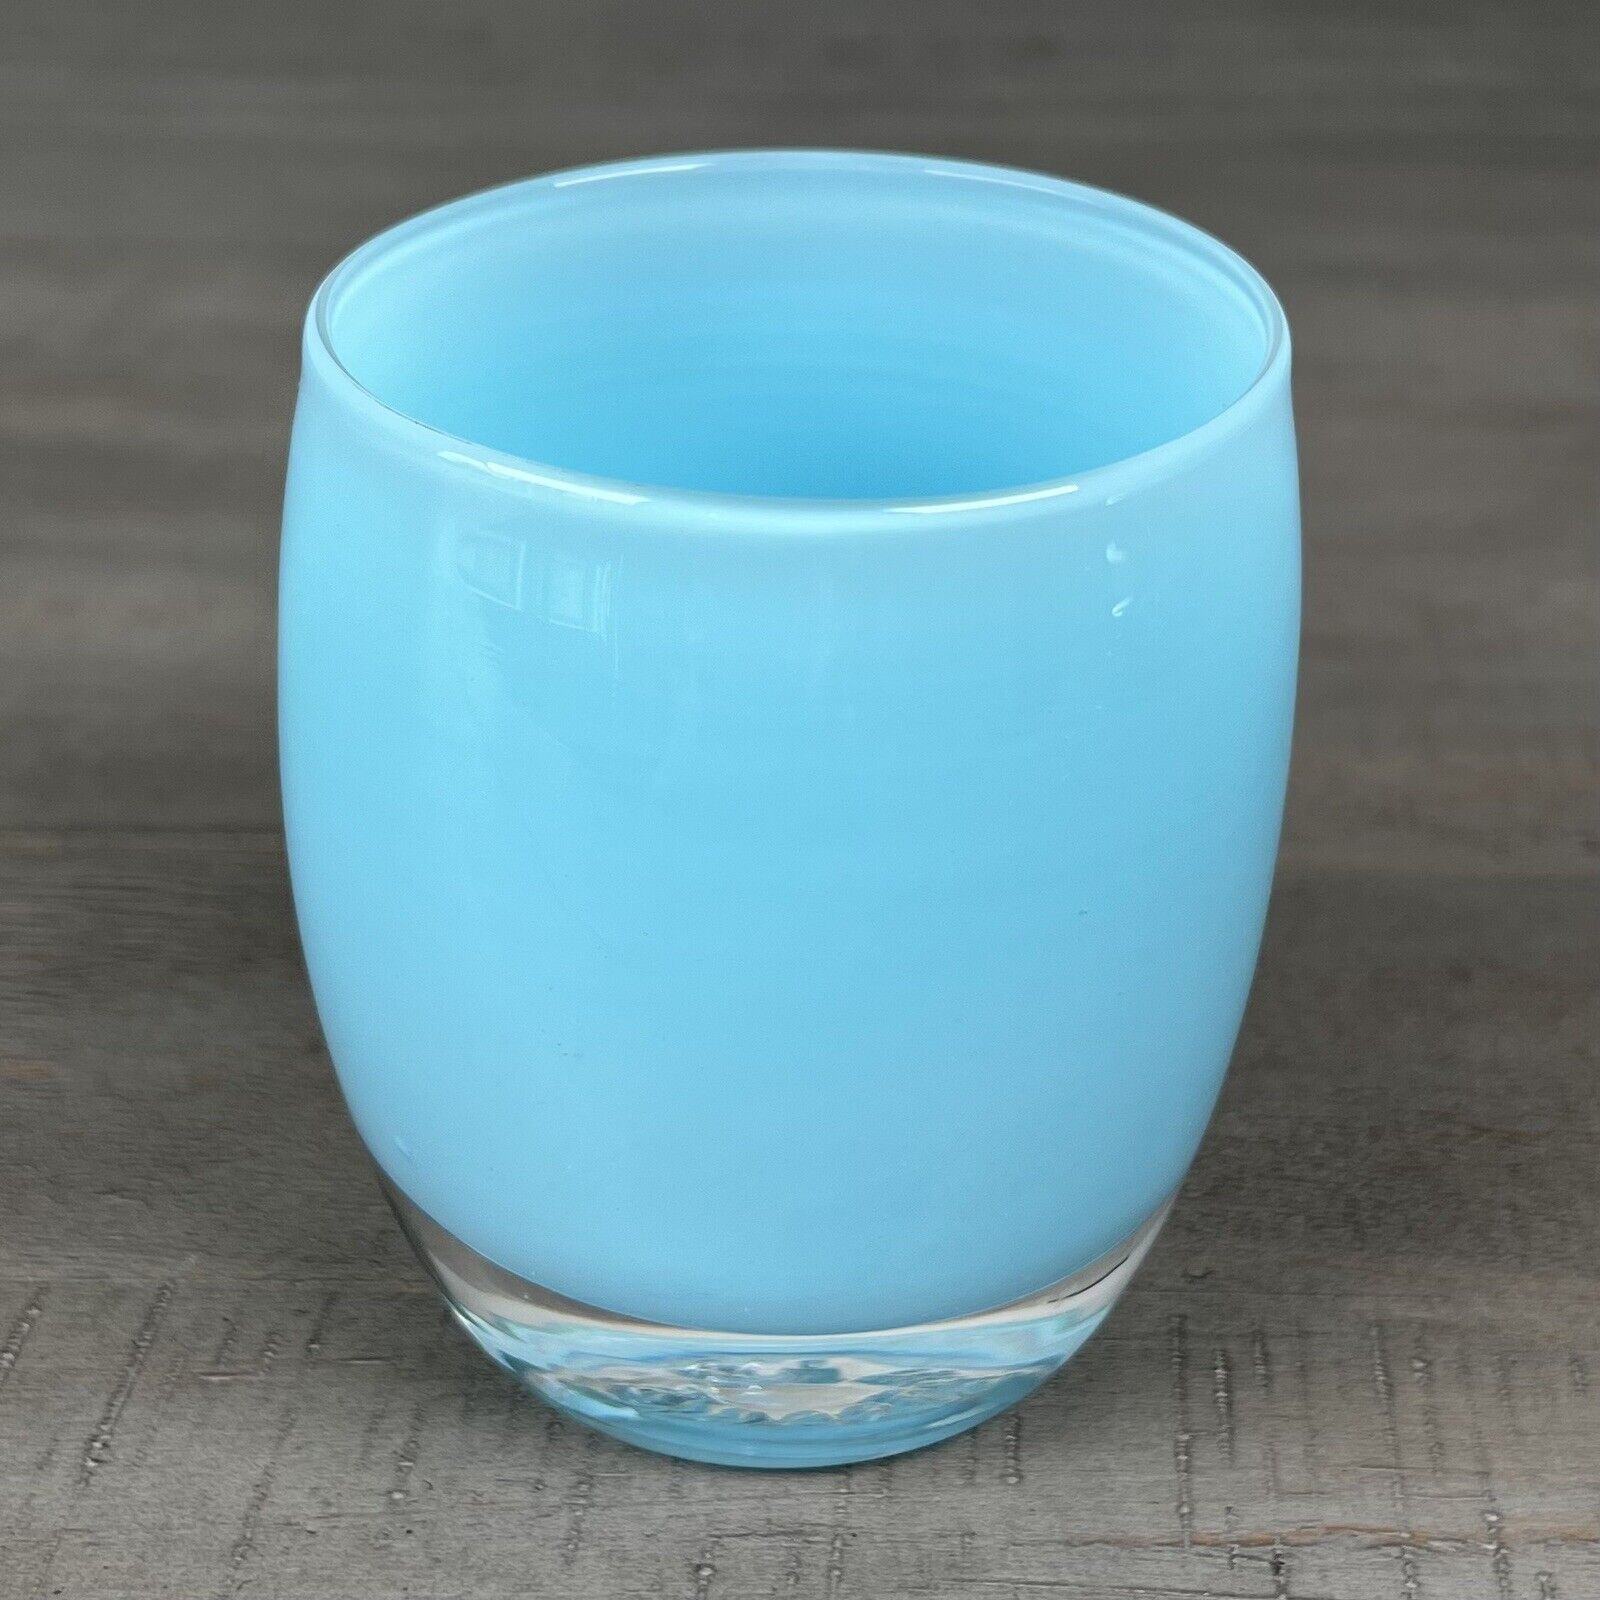 Glassybaby Hand Blown Glass Candle Holder Votive in Sorry Light Blue